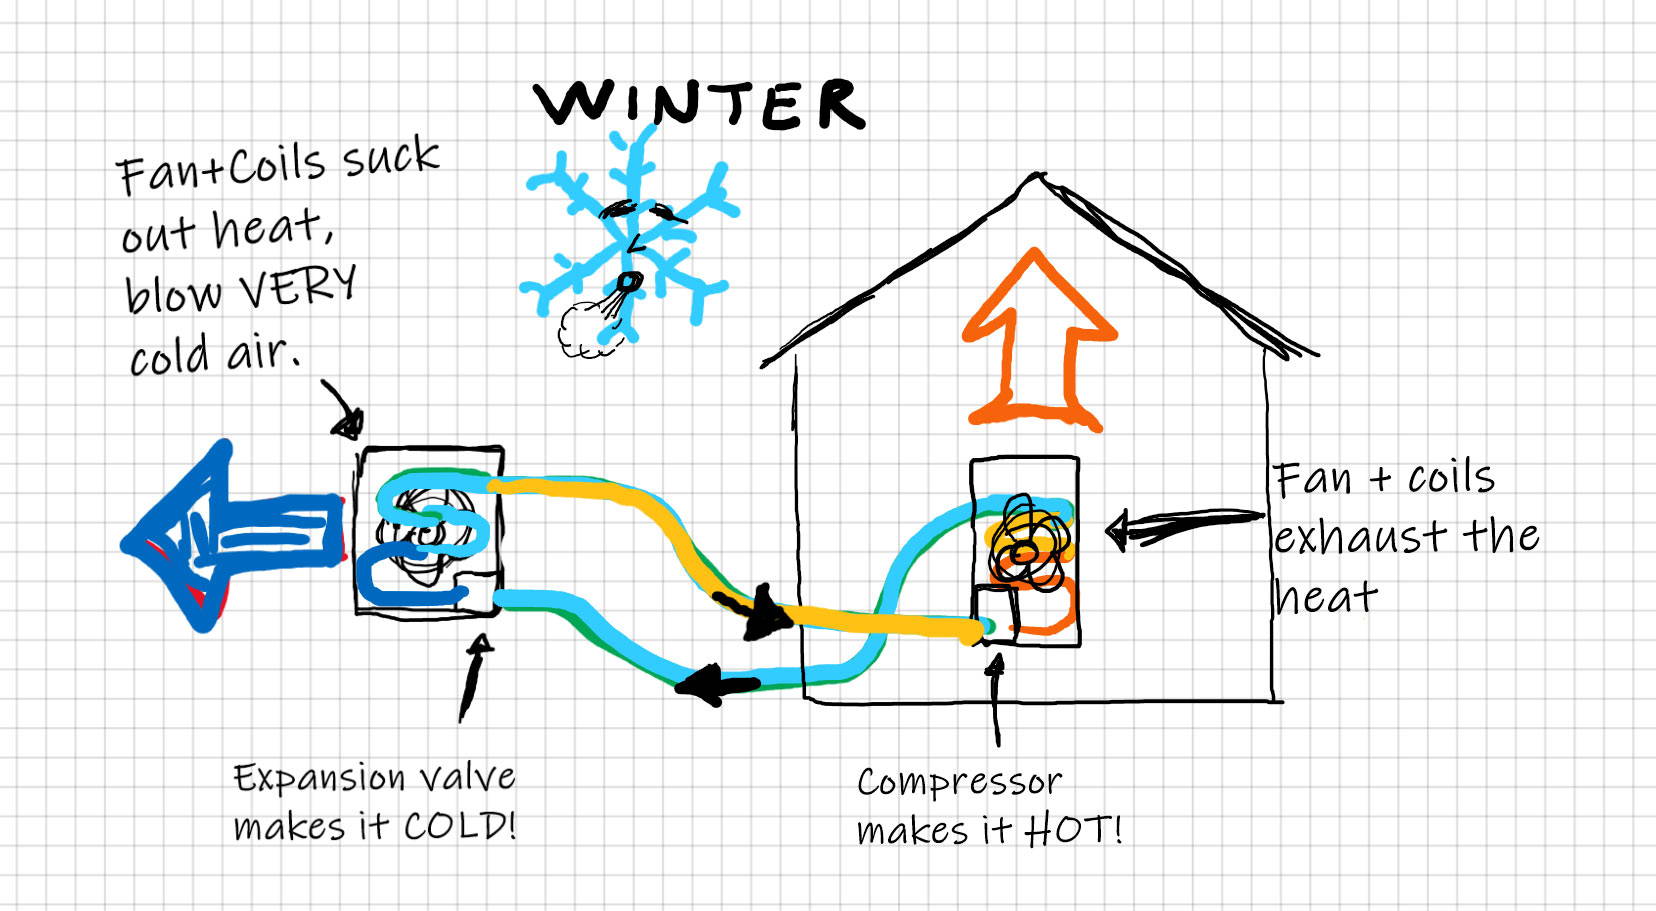 How Does A Heat Pump Work In Winter? The Heating Cycle illustration